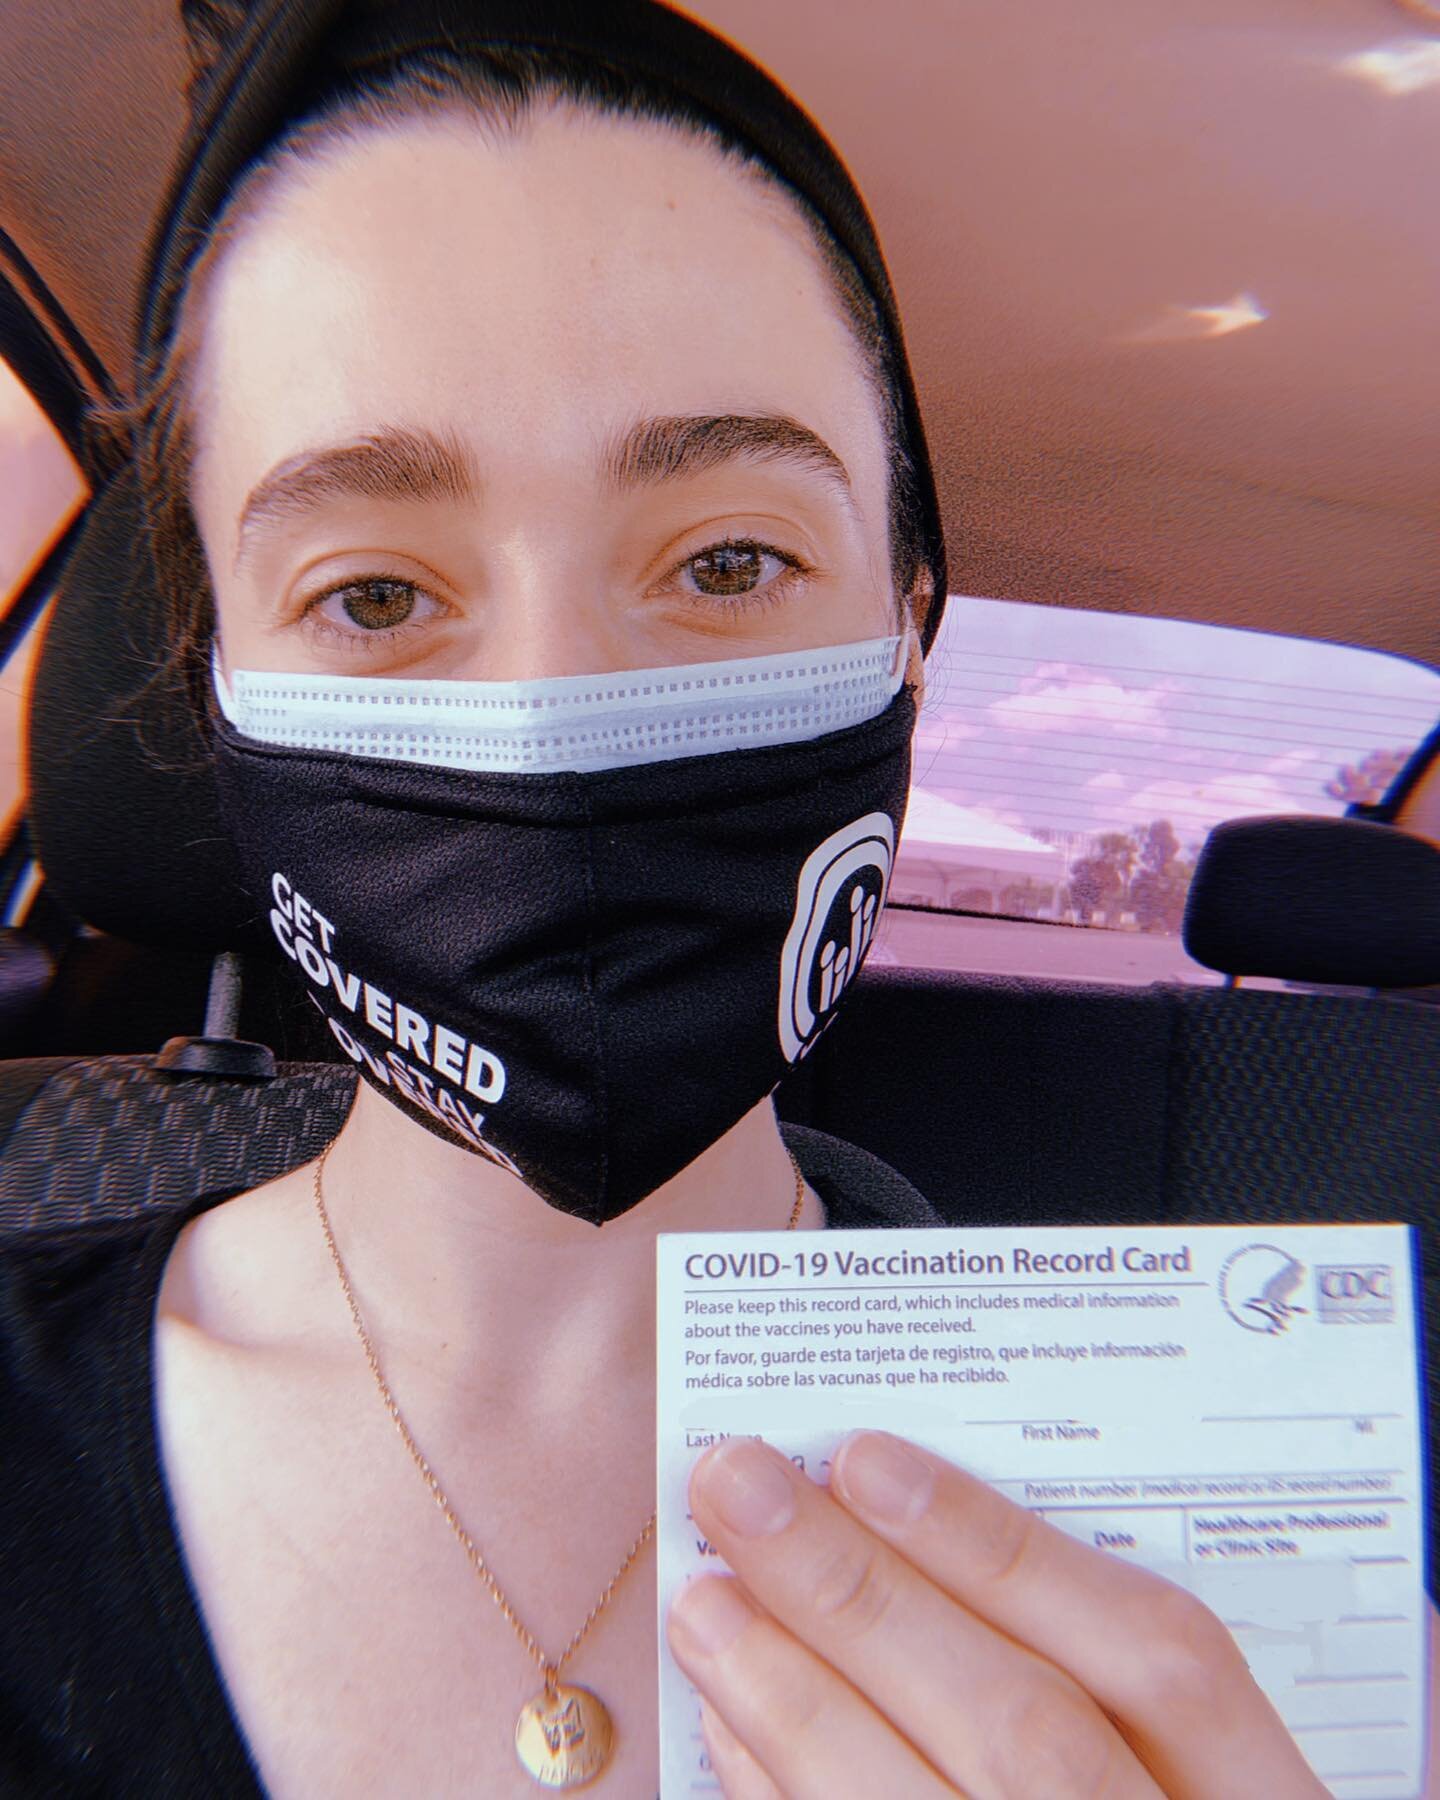 It&rsquo;s hard to find the words to explain how I&rsquo;m feeling right now. As someone with a chronic medical condition, the past year has been filled with anxiety, fear, and a feeling of vulnerability. Being able to get this vaccine means I&rsquo;